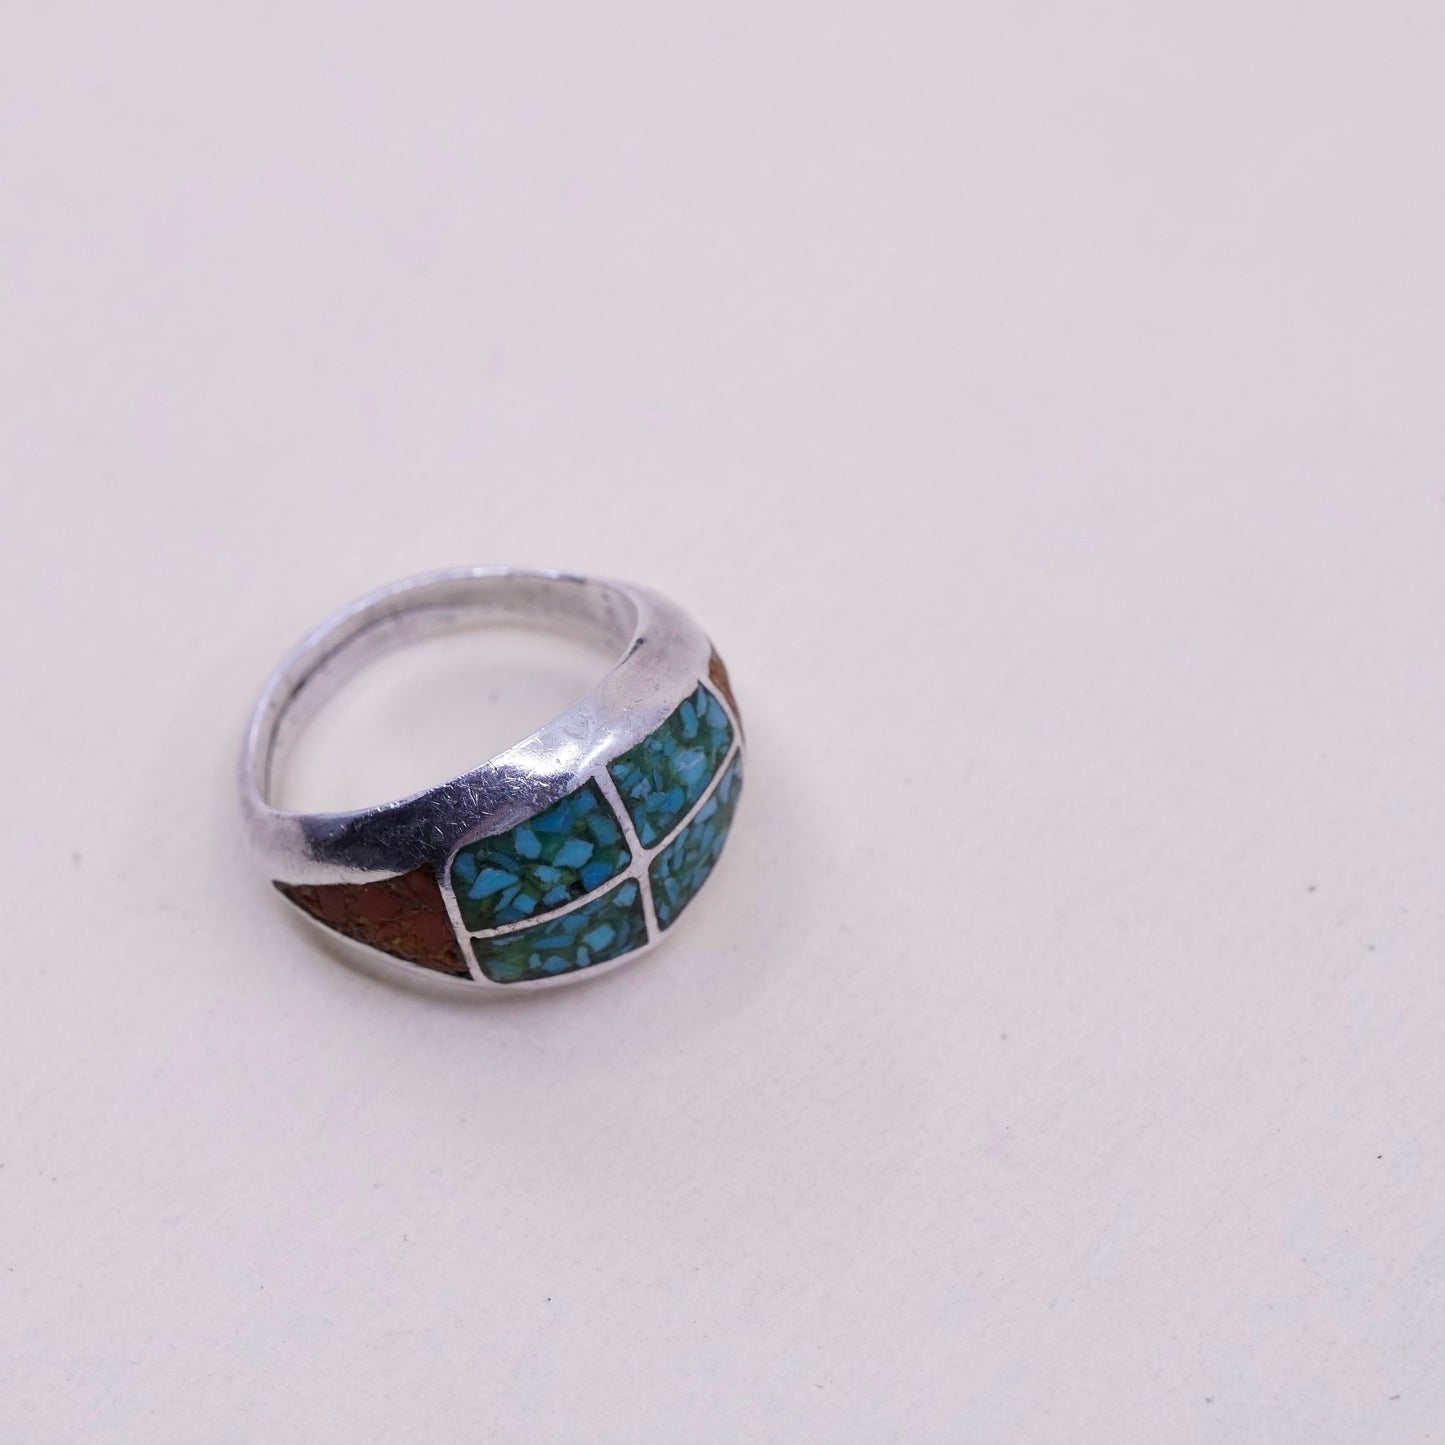 sz 9, natives American Sterling 925 silver handmade ring w/ turquoise N coral